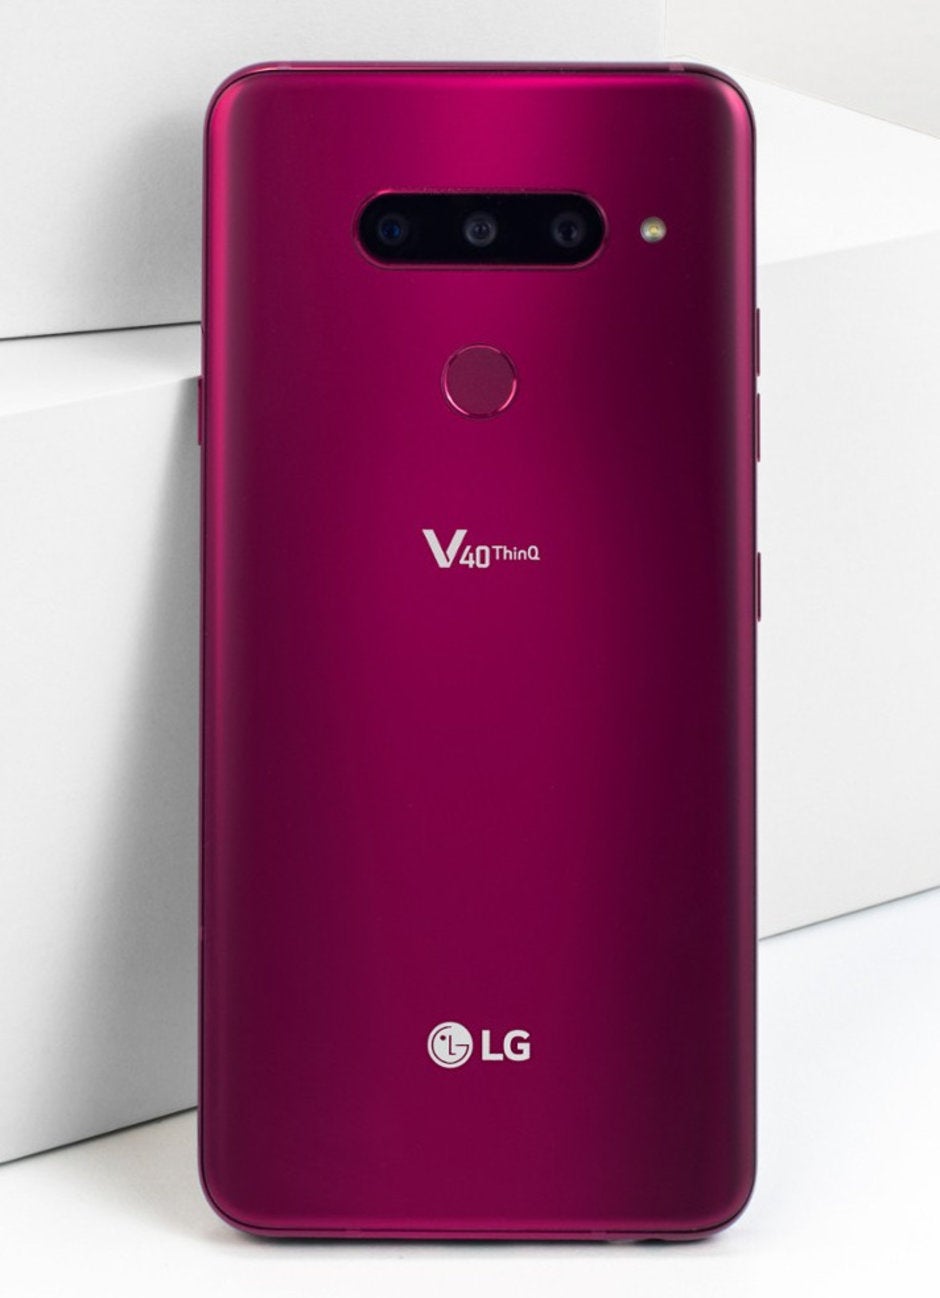 LG V40 ThinQ is announced with five cameras: three at the back, two at the front